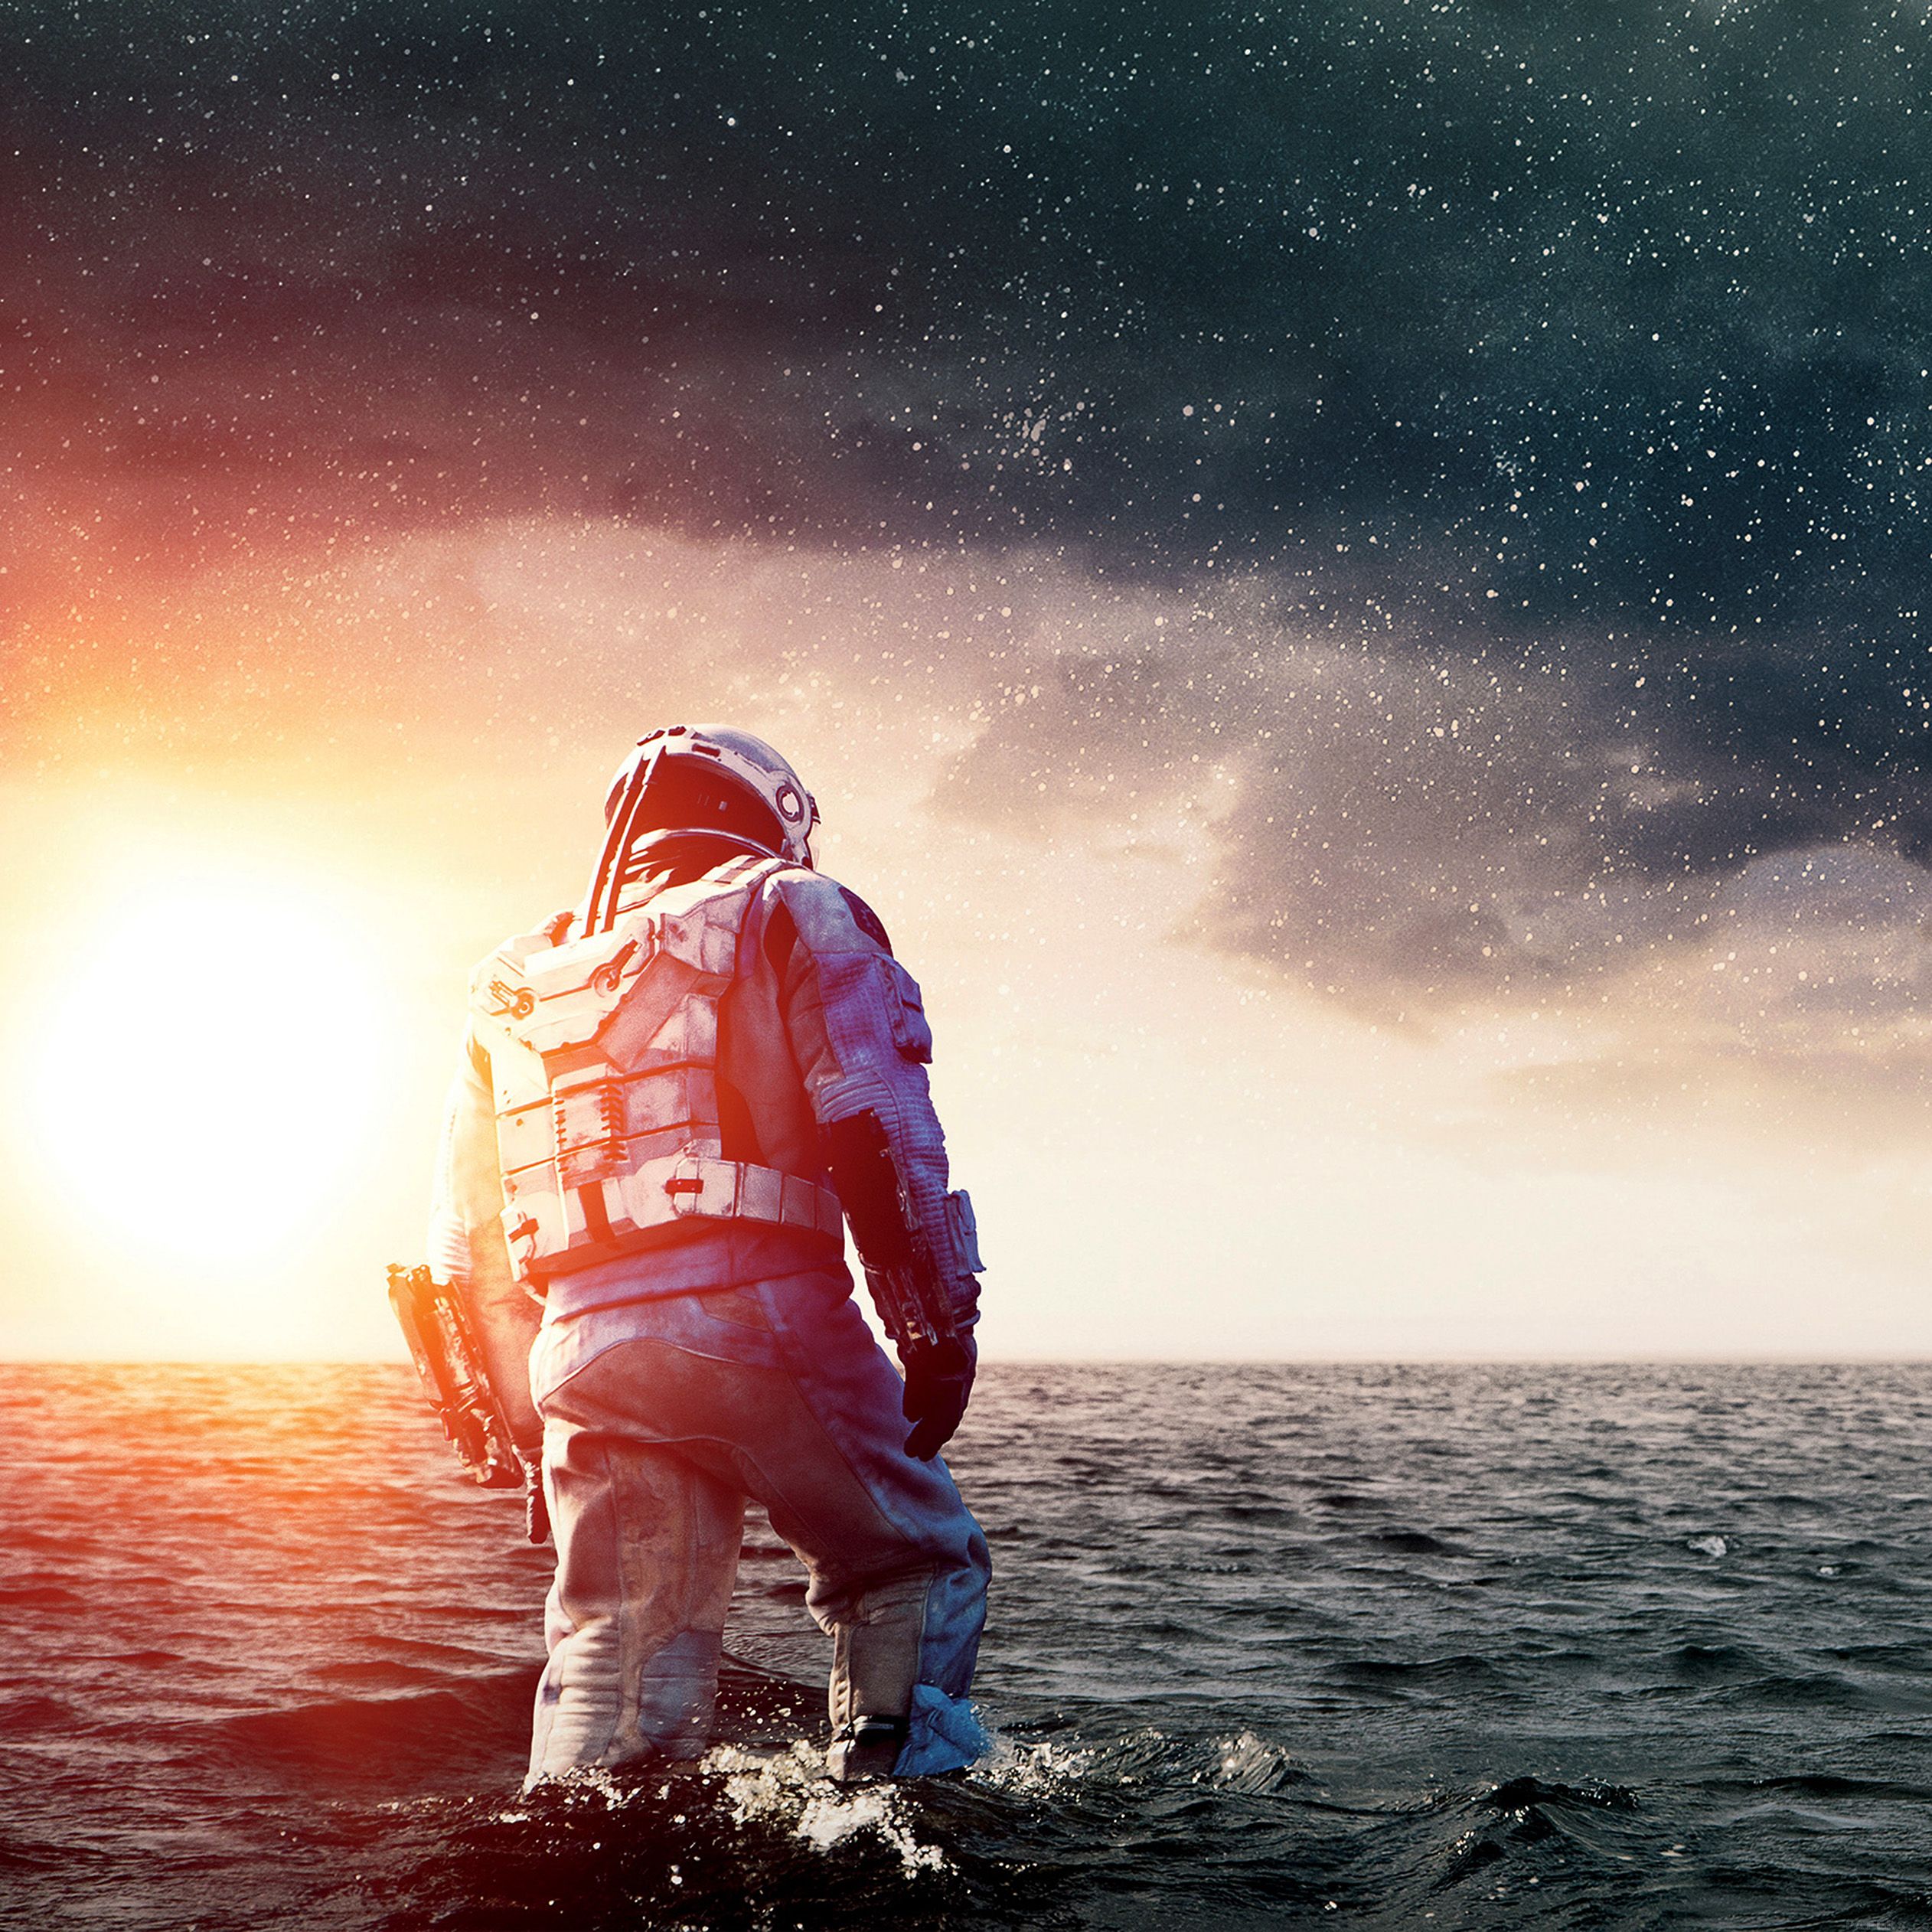 Interstellar wallpaper for iPhone and iPad